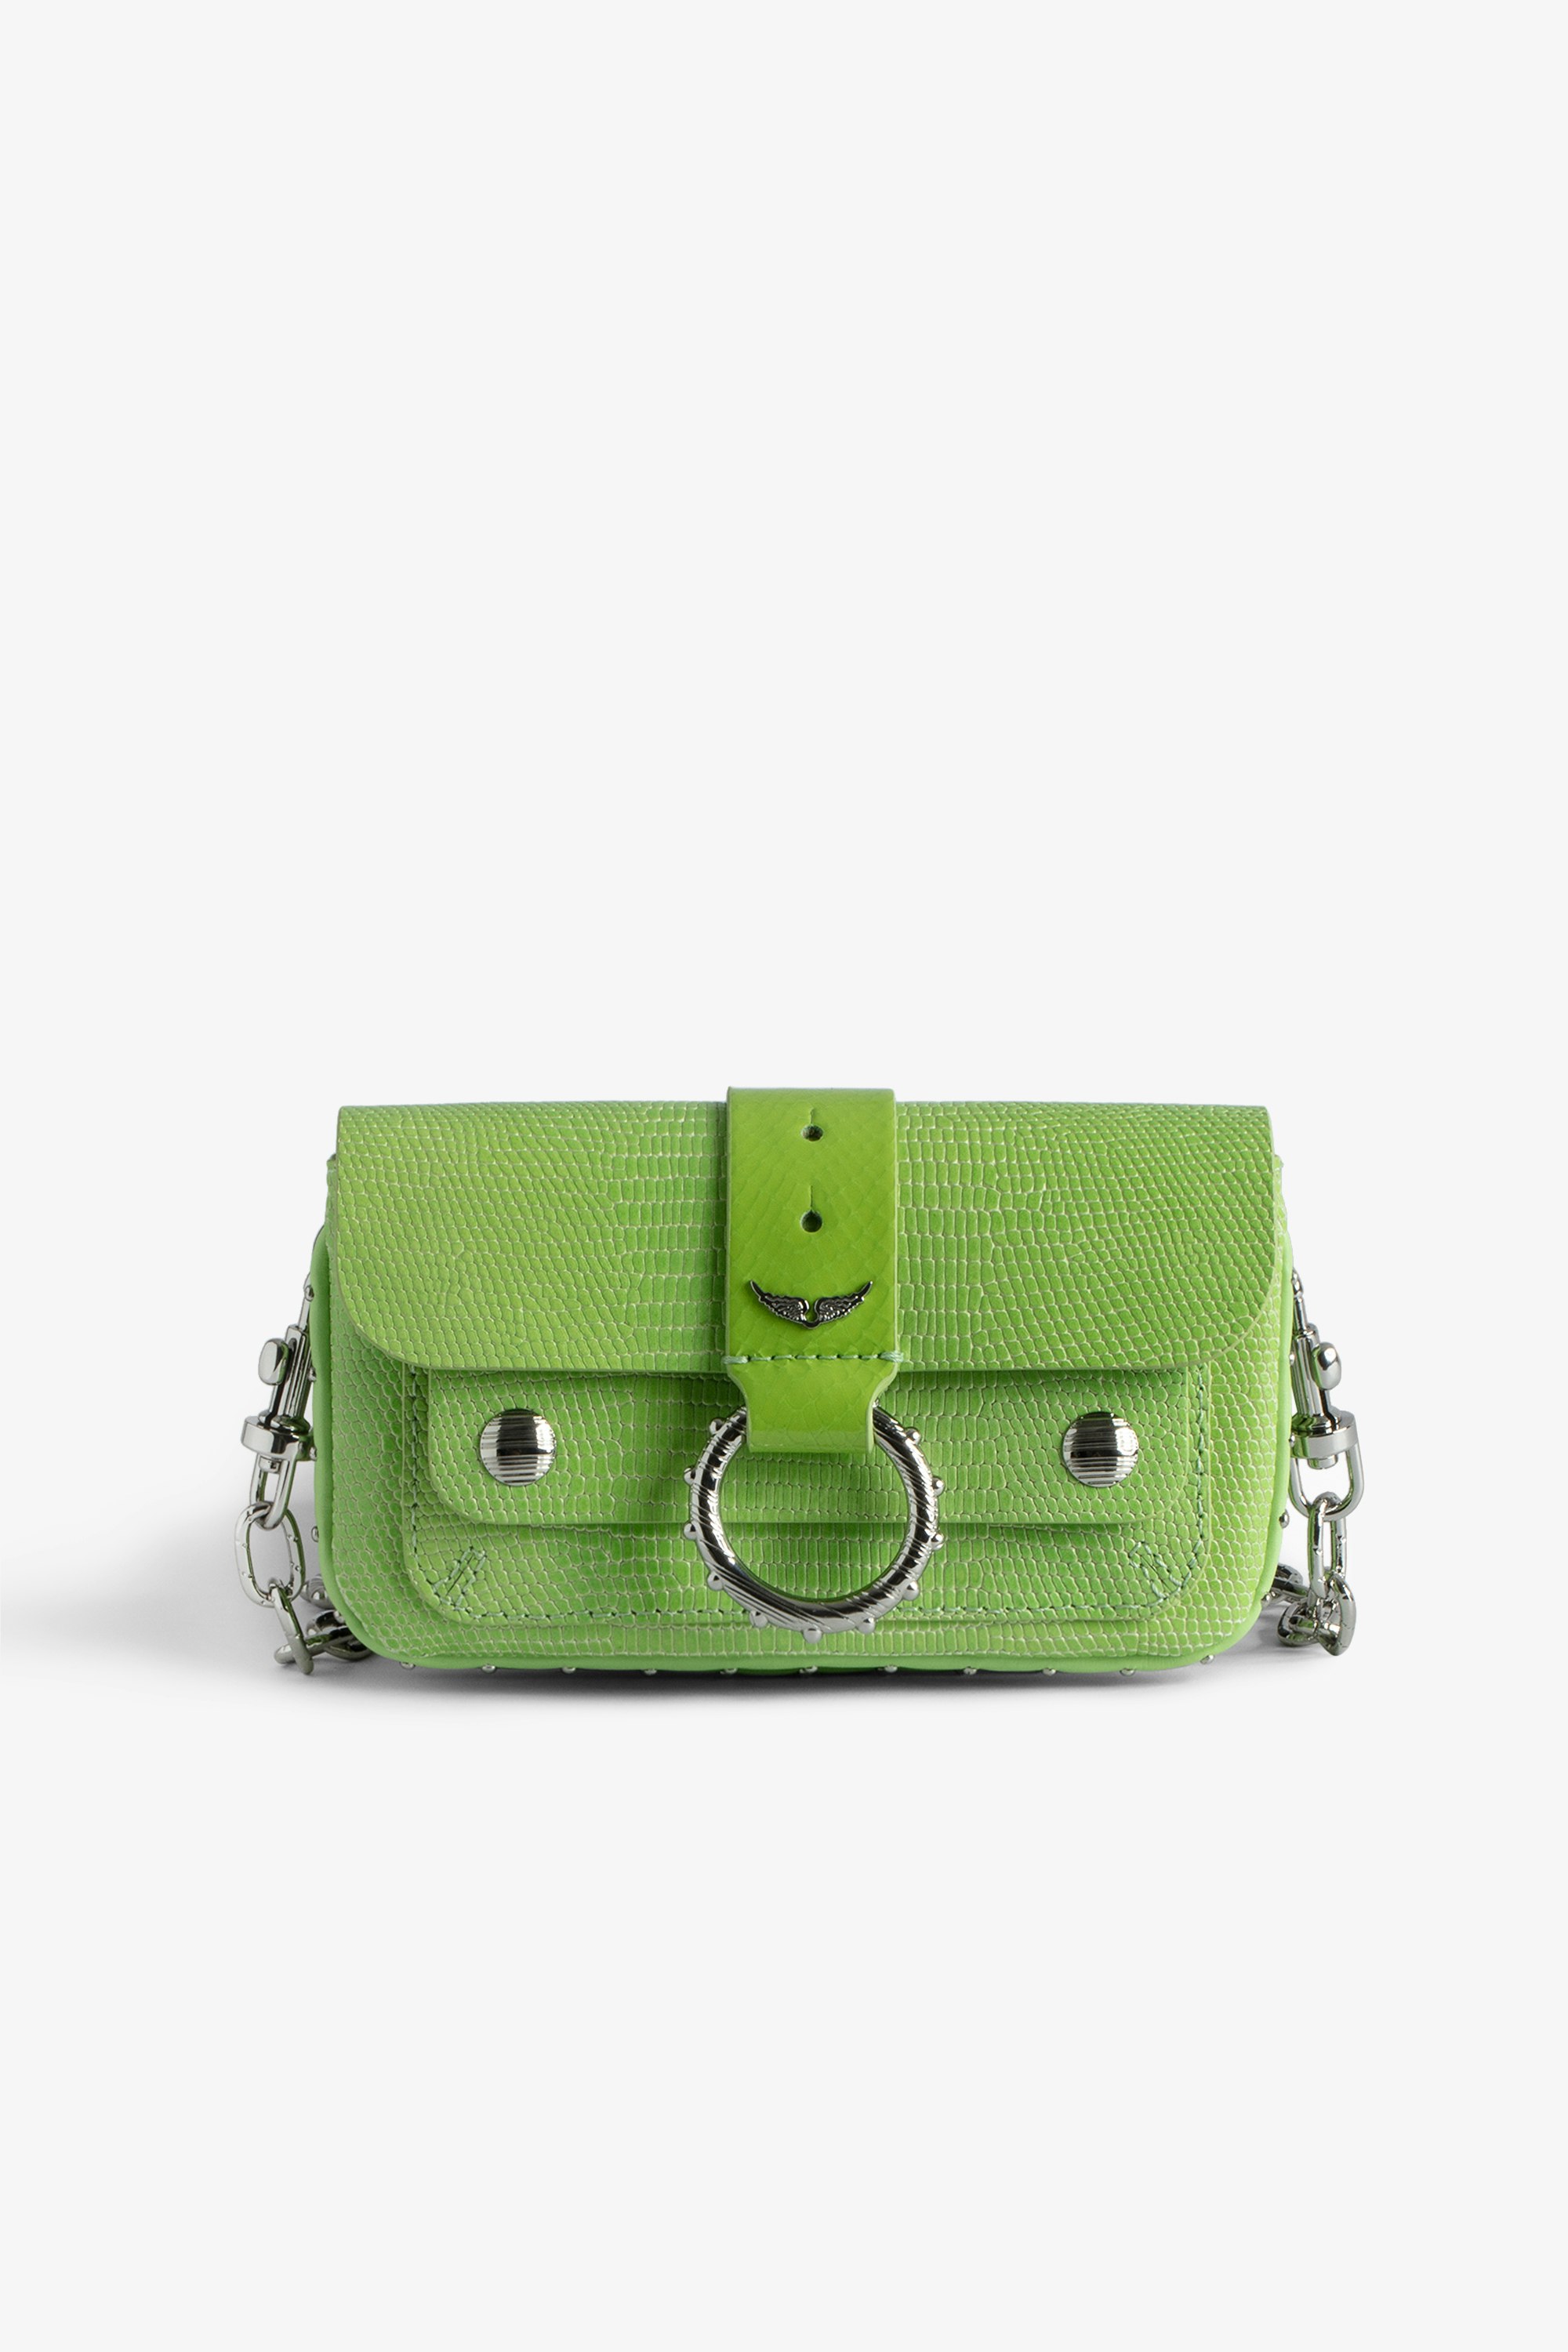 Kate Wallet Glossy Wild Bag Women’s green iguana-effect patent leather mini bag with metal chain.